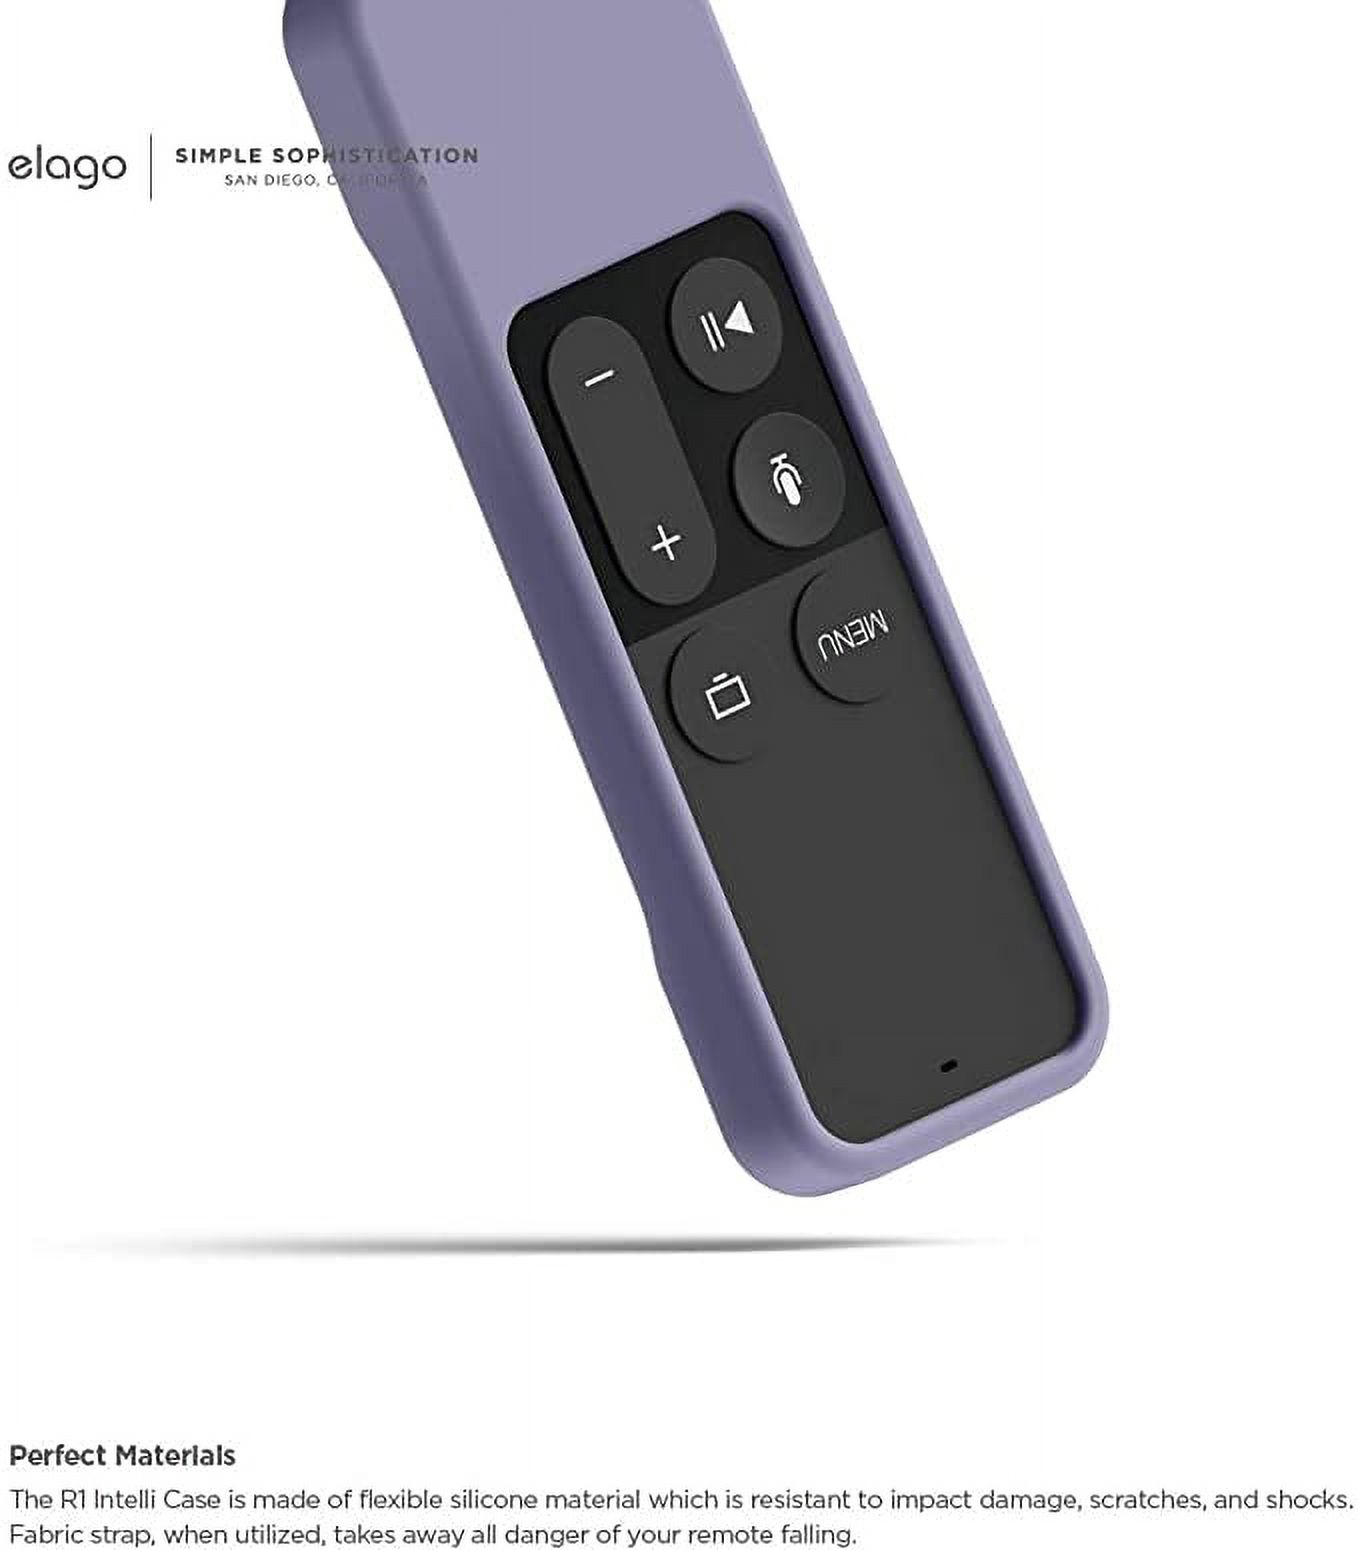 Apple Tv Remote Case Cover - elago R1 Intelli Case for Apple TV Siri Remote 4K / 4th Generation (Lavender Grey) – Magnet Technology, Shock Absorption, Lanyard Included, Apple Tv 4k Remote Case - image 5 of 7